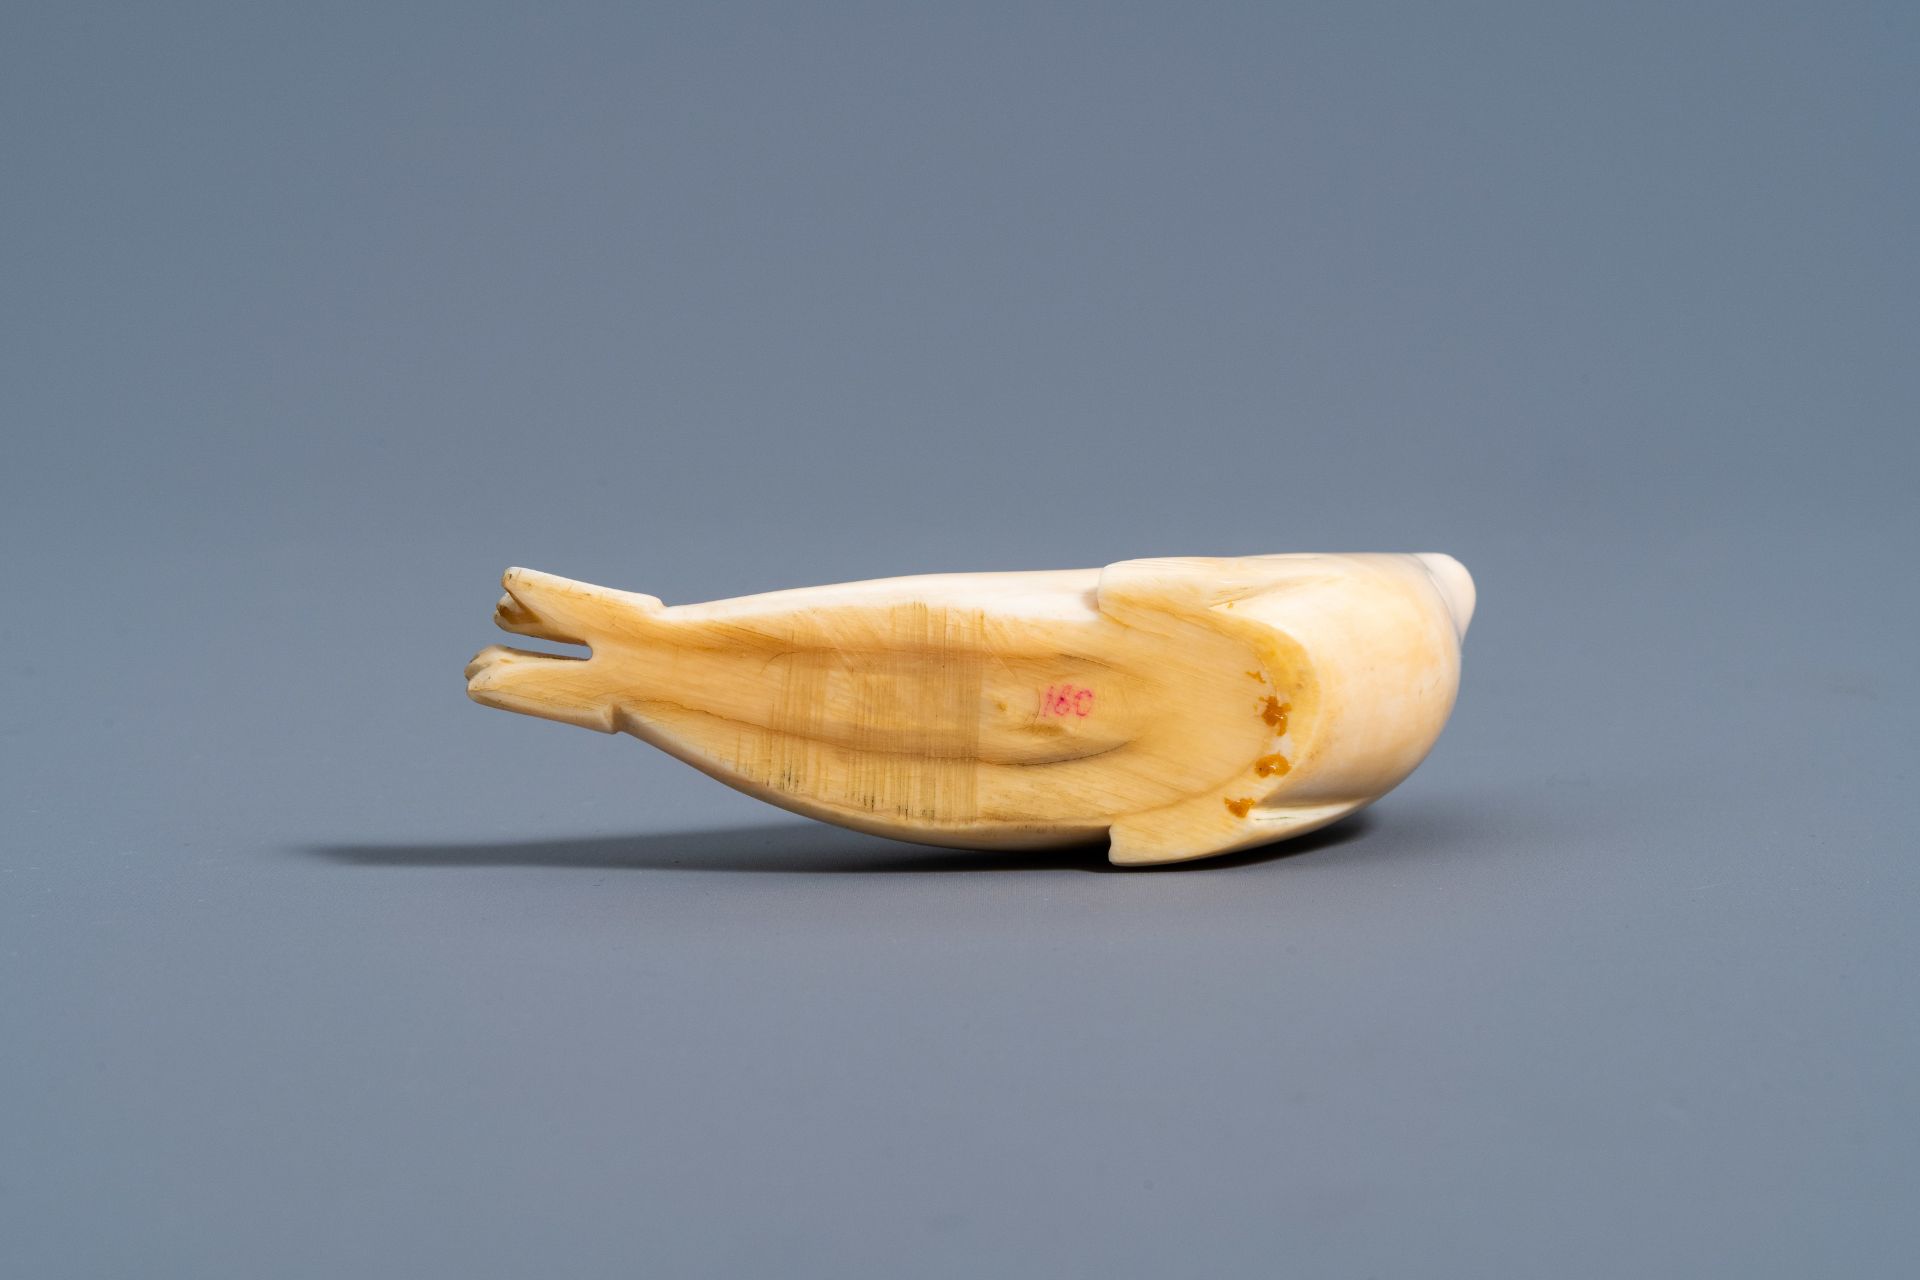 An Inuit carved whale ivory figure of a seal, Canada or Alaska, 19th C. - Image 8 of 11